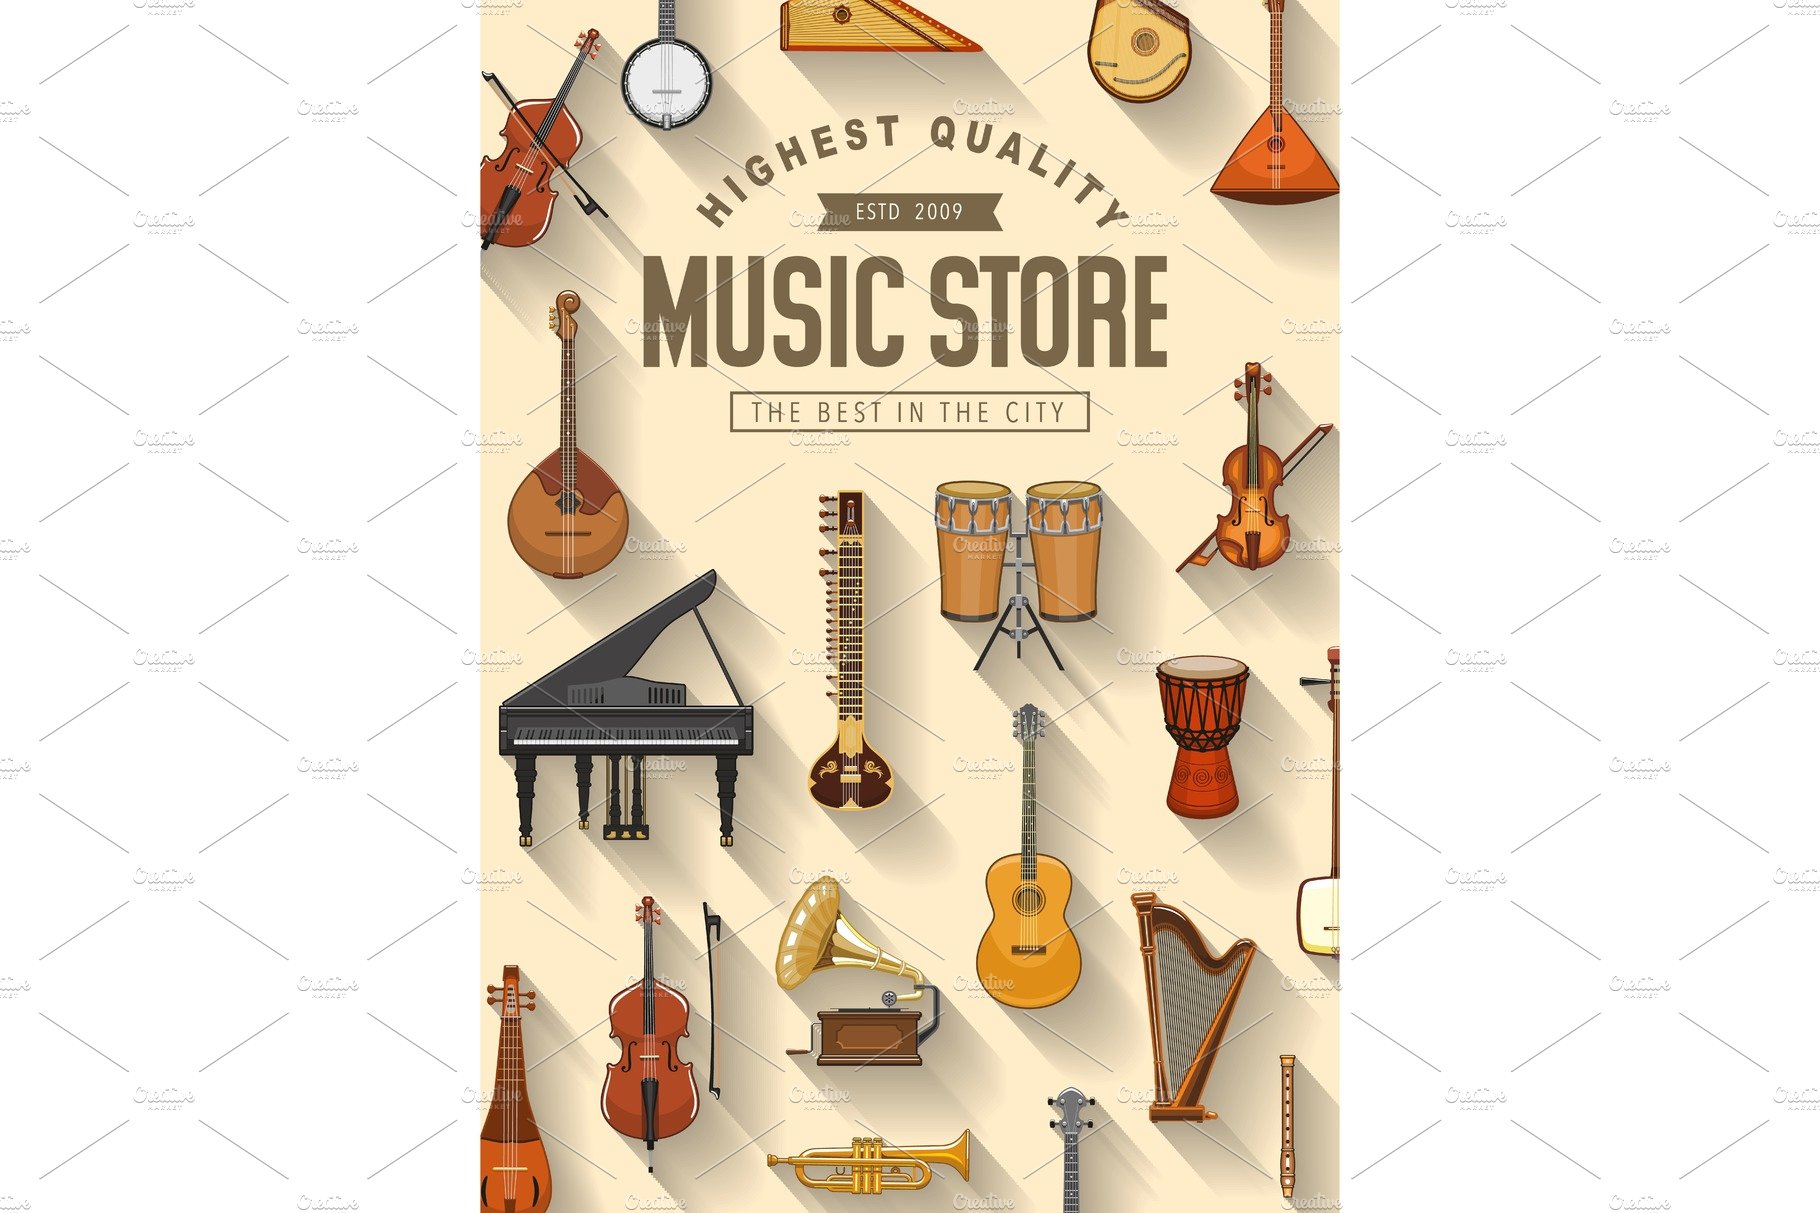 Folk, jazz and classic music cover image.